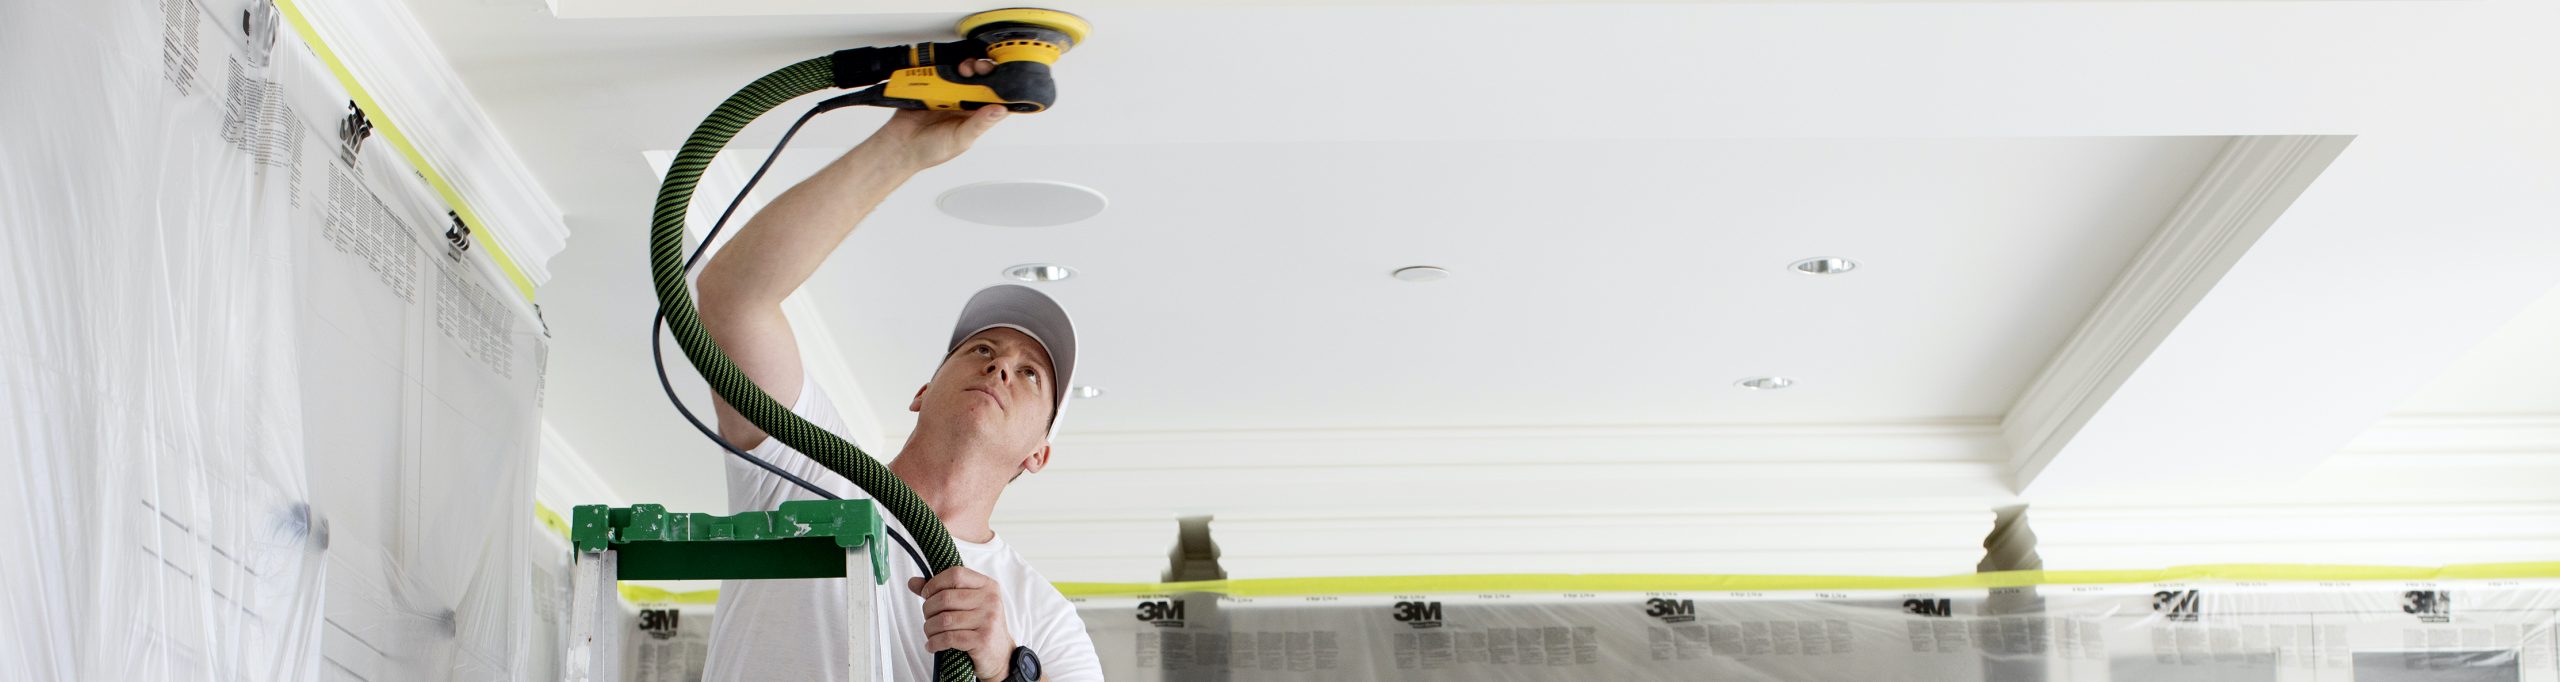 A man standing on a ladder uses a zero-dust sander on a white ceiling